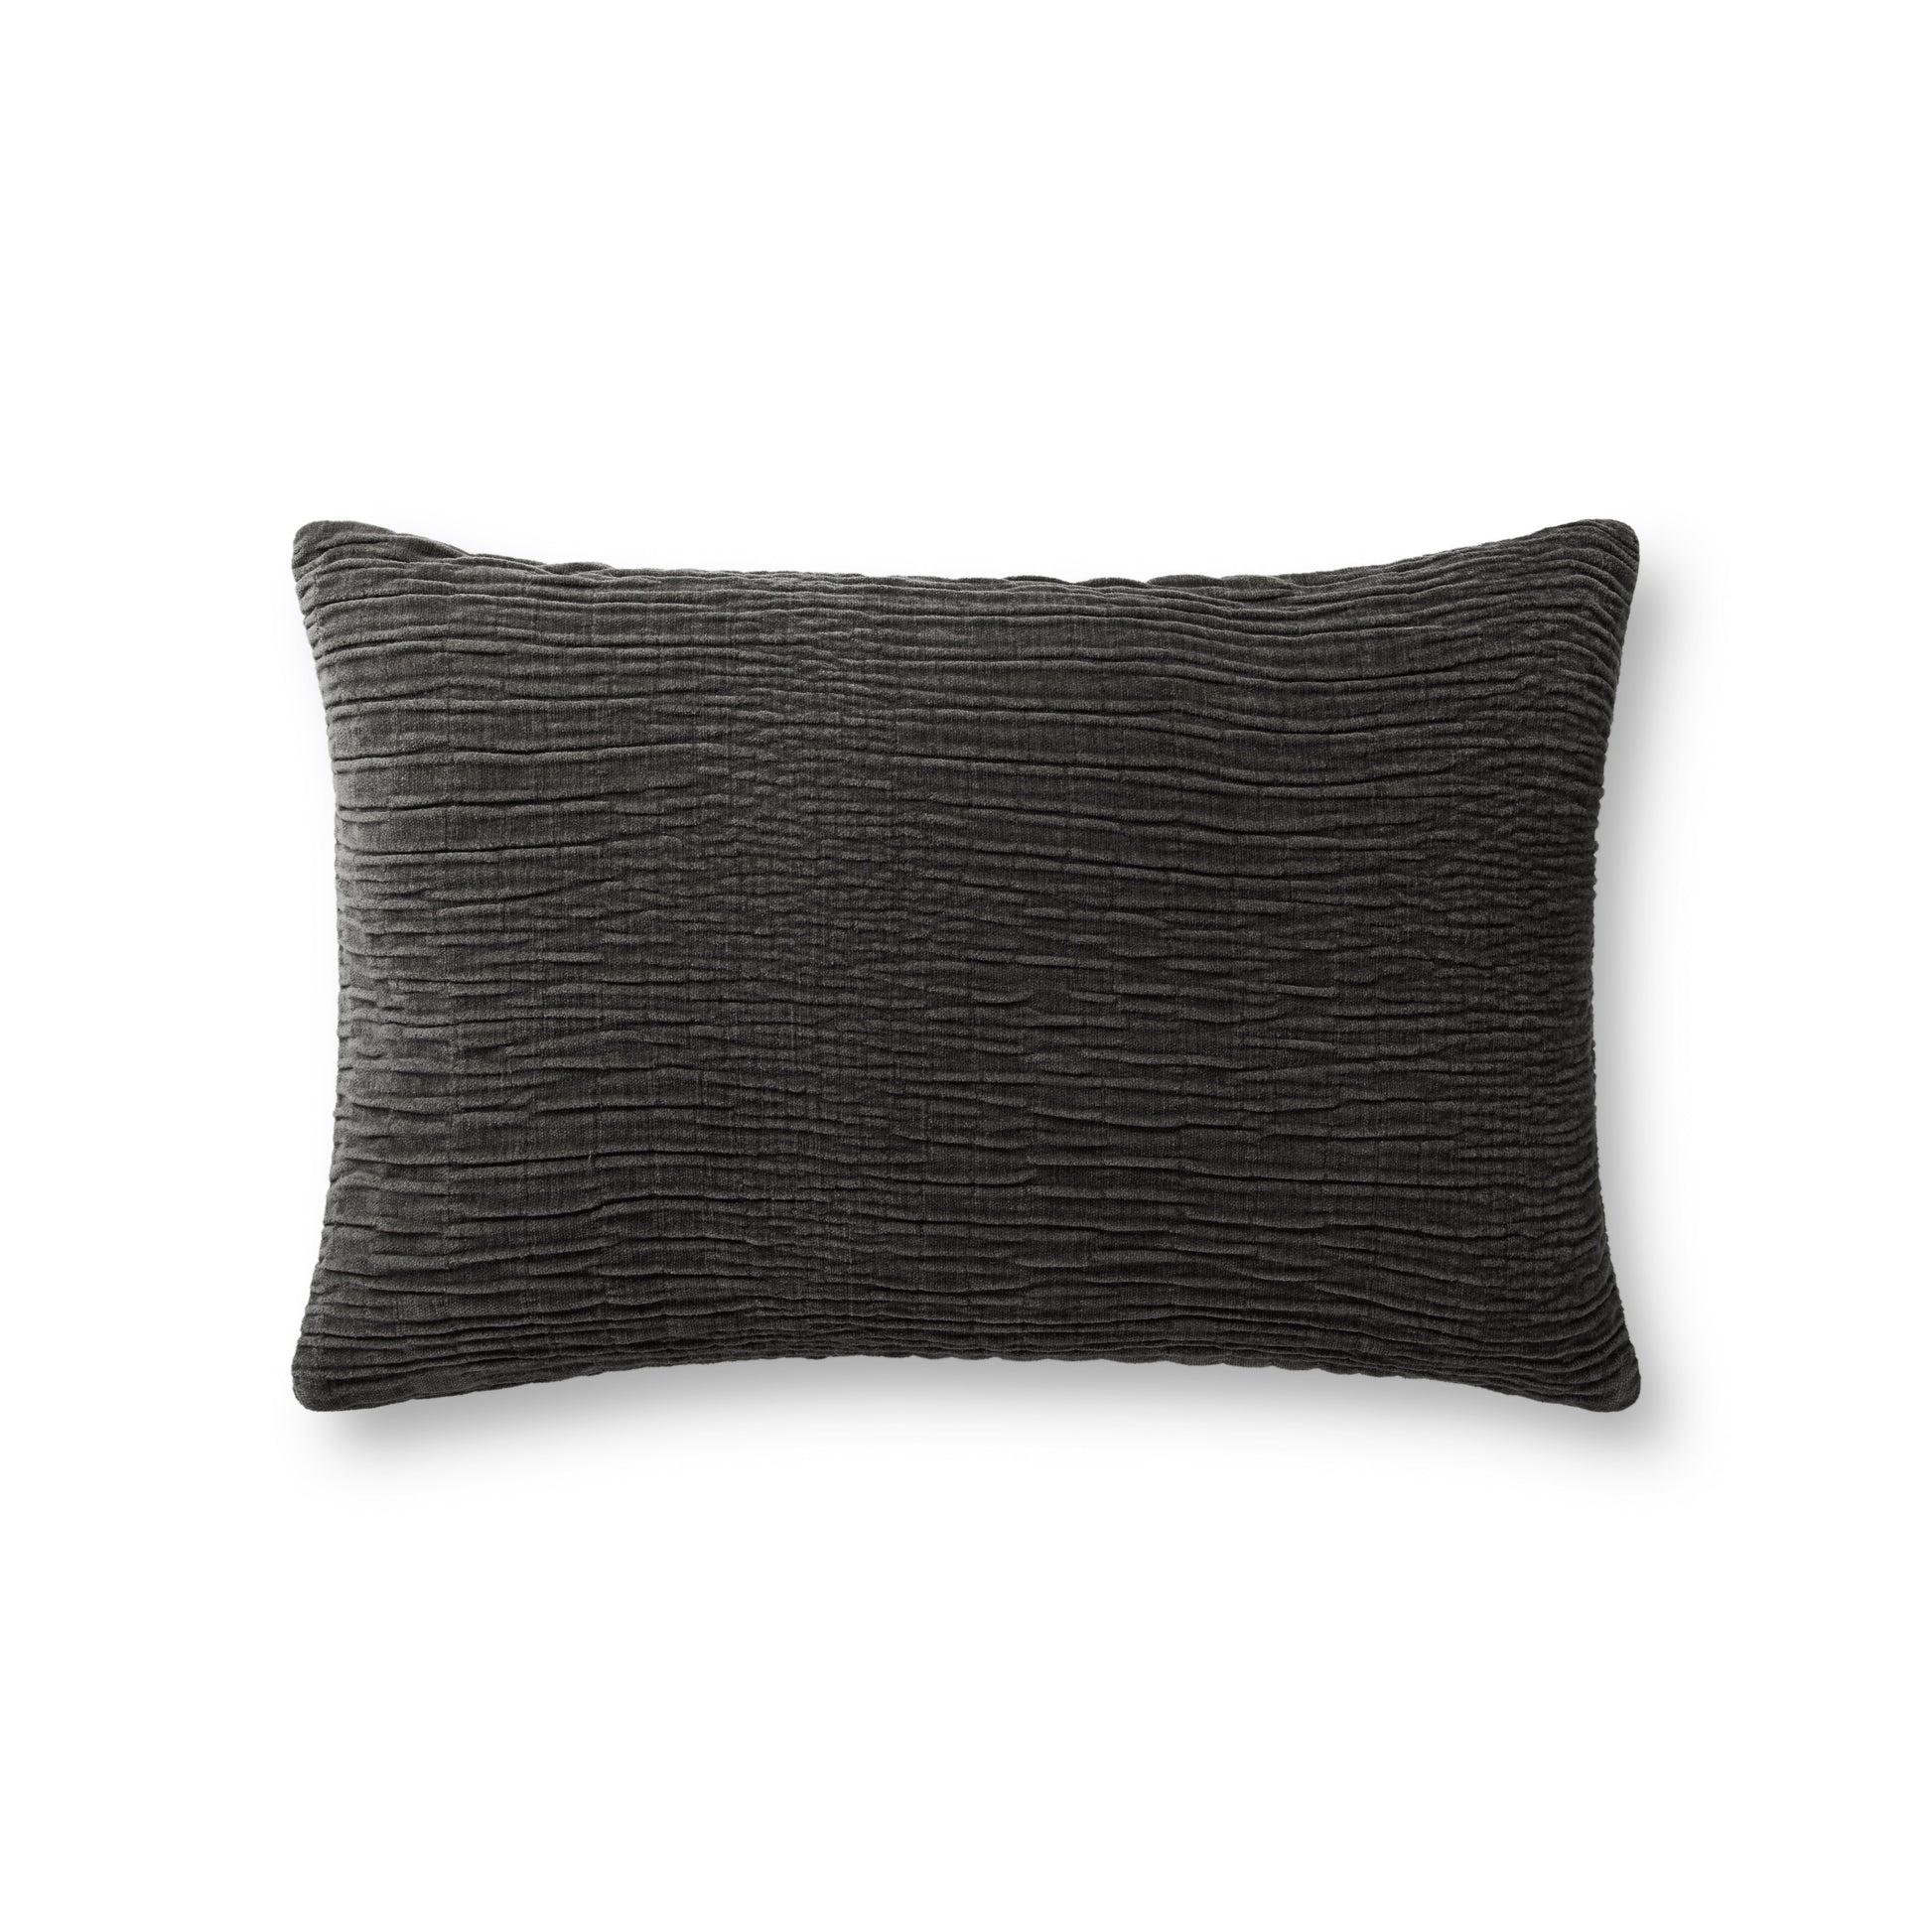 Photo of a pillow;  Charcoal 13'' x 21'' Cover w/Poly Pillow